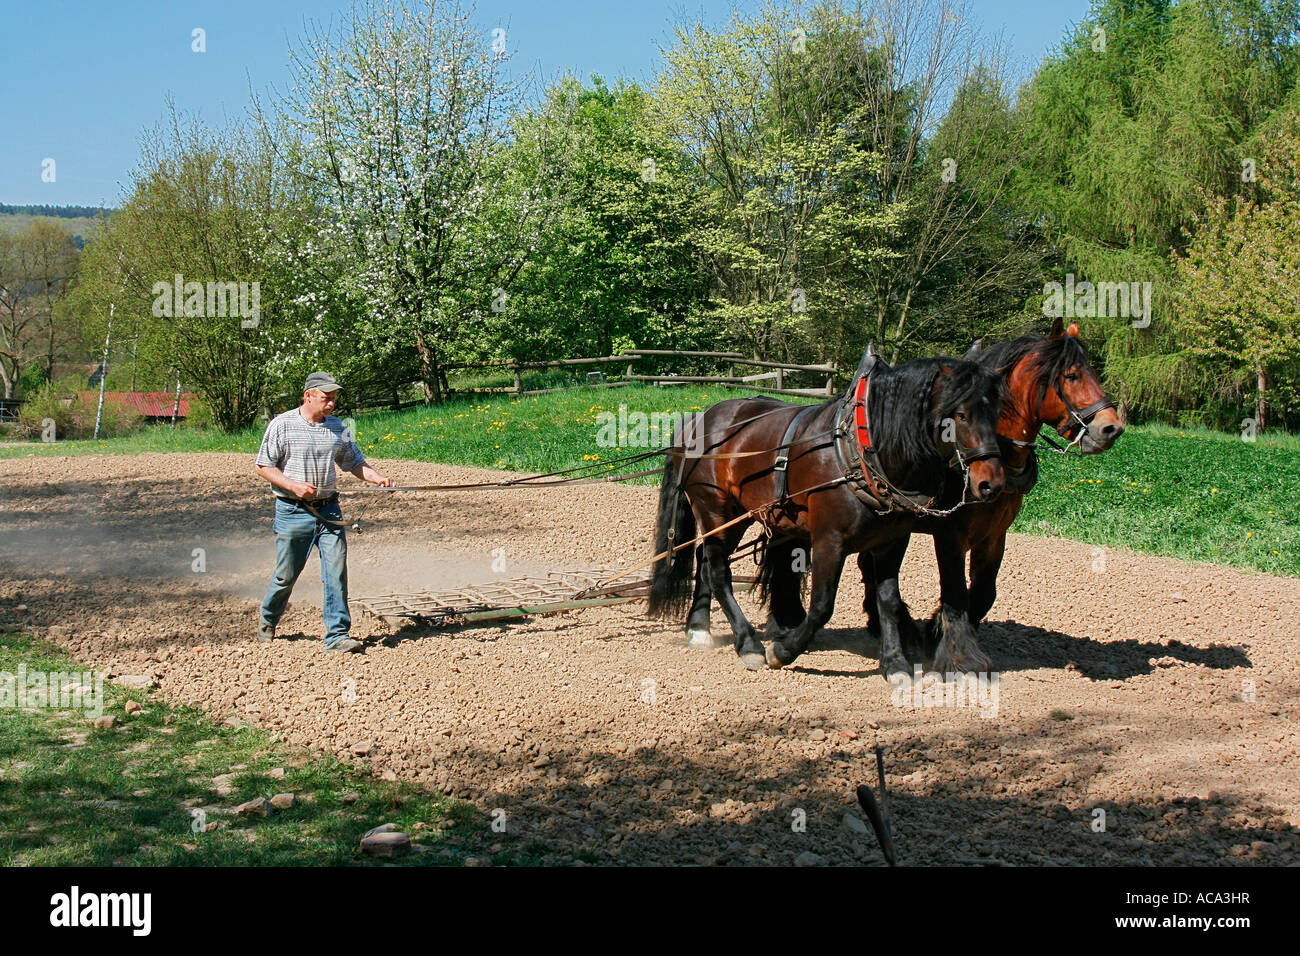 Historic agriculture, harrowing farmer with harnessed horses, Hessenpark, Neu-Anspach, Taunus, Hesse, Germany Stock Photo